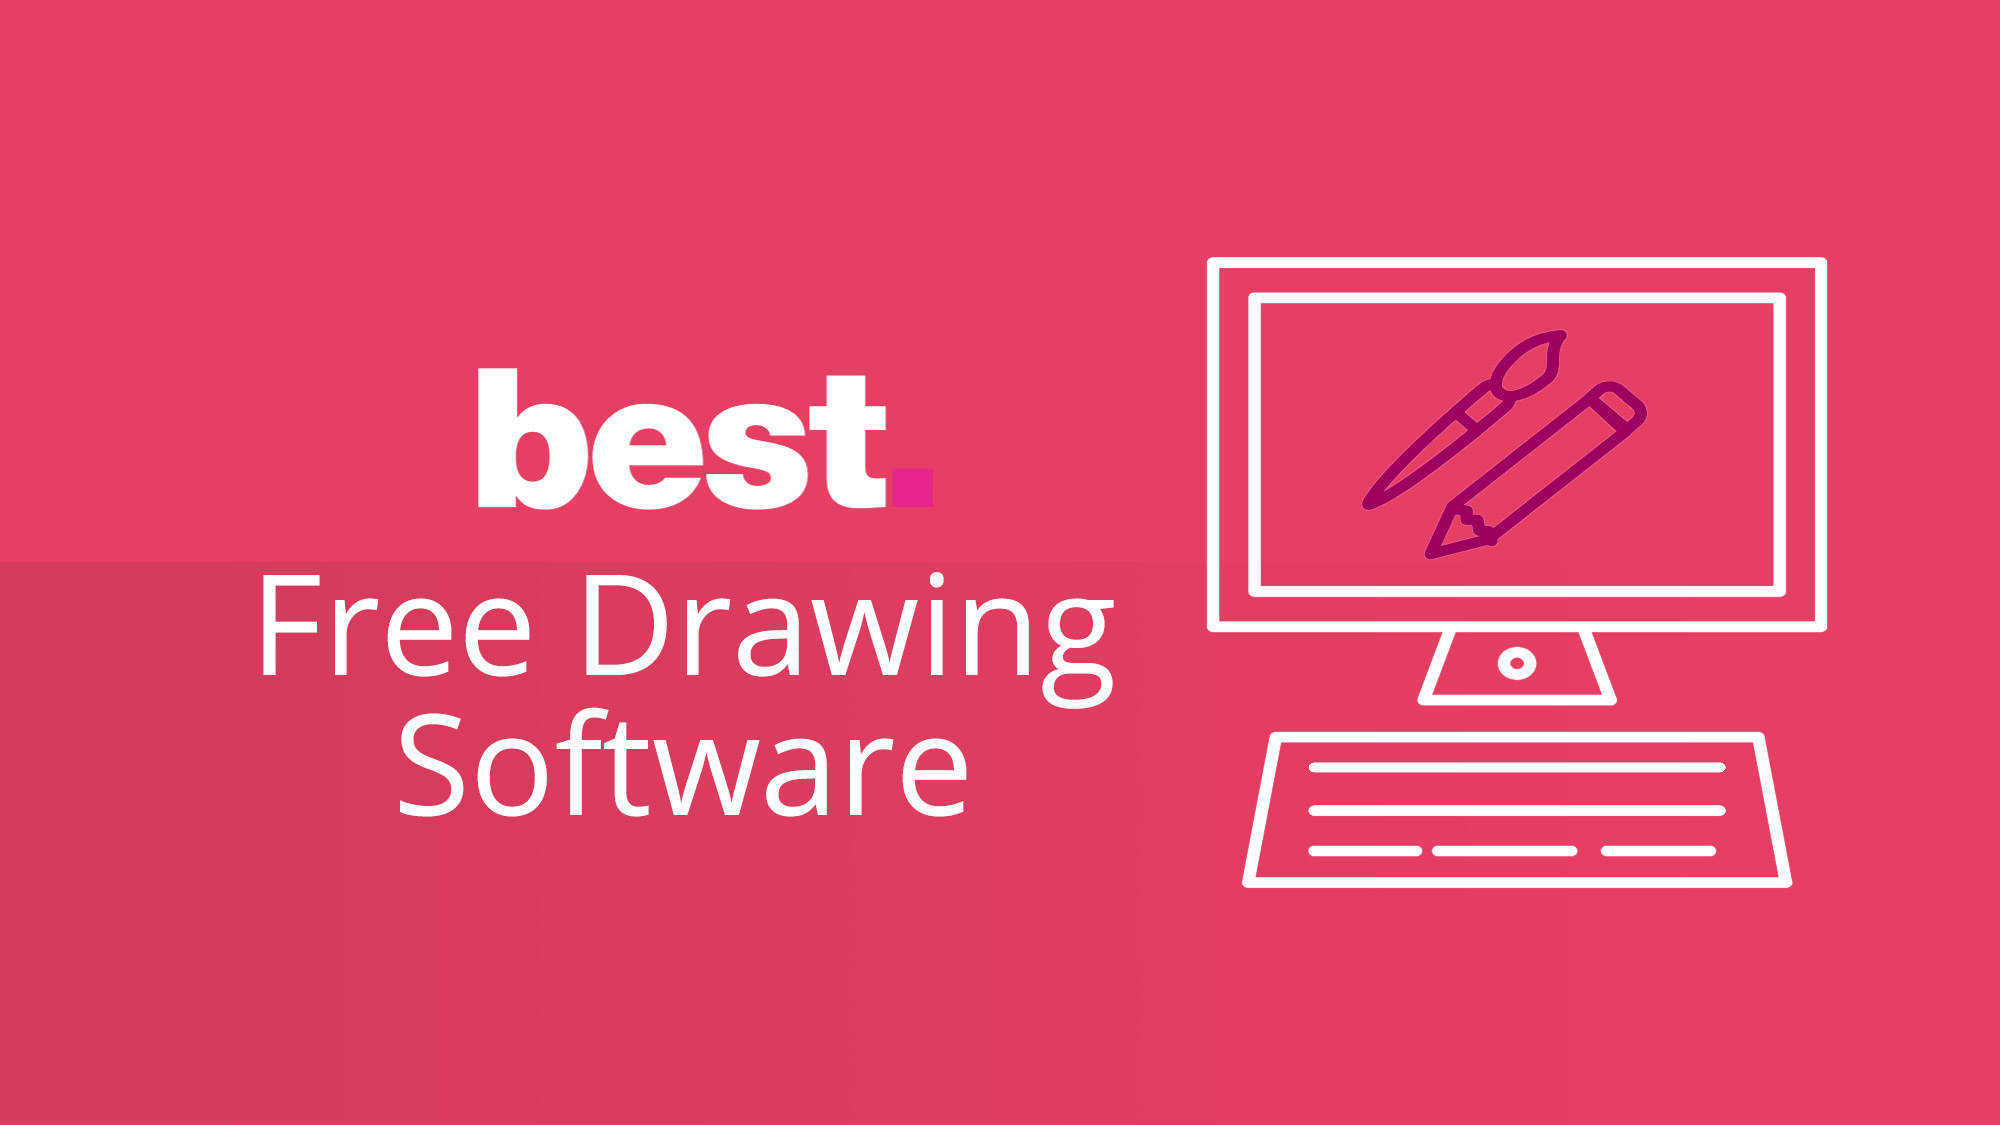 best free drawing software for surface pro 4